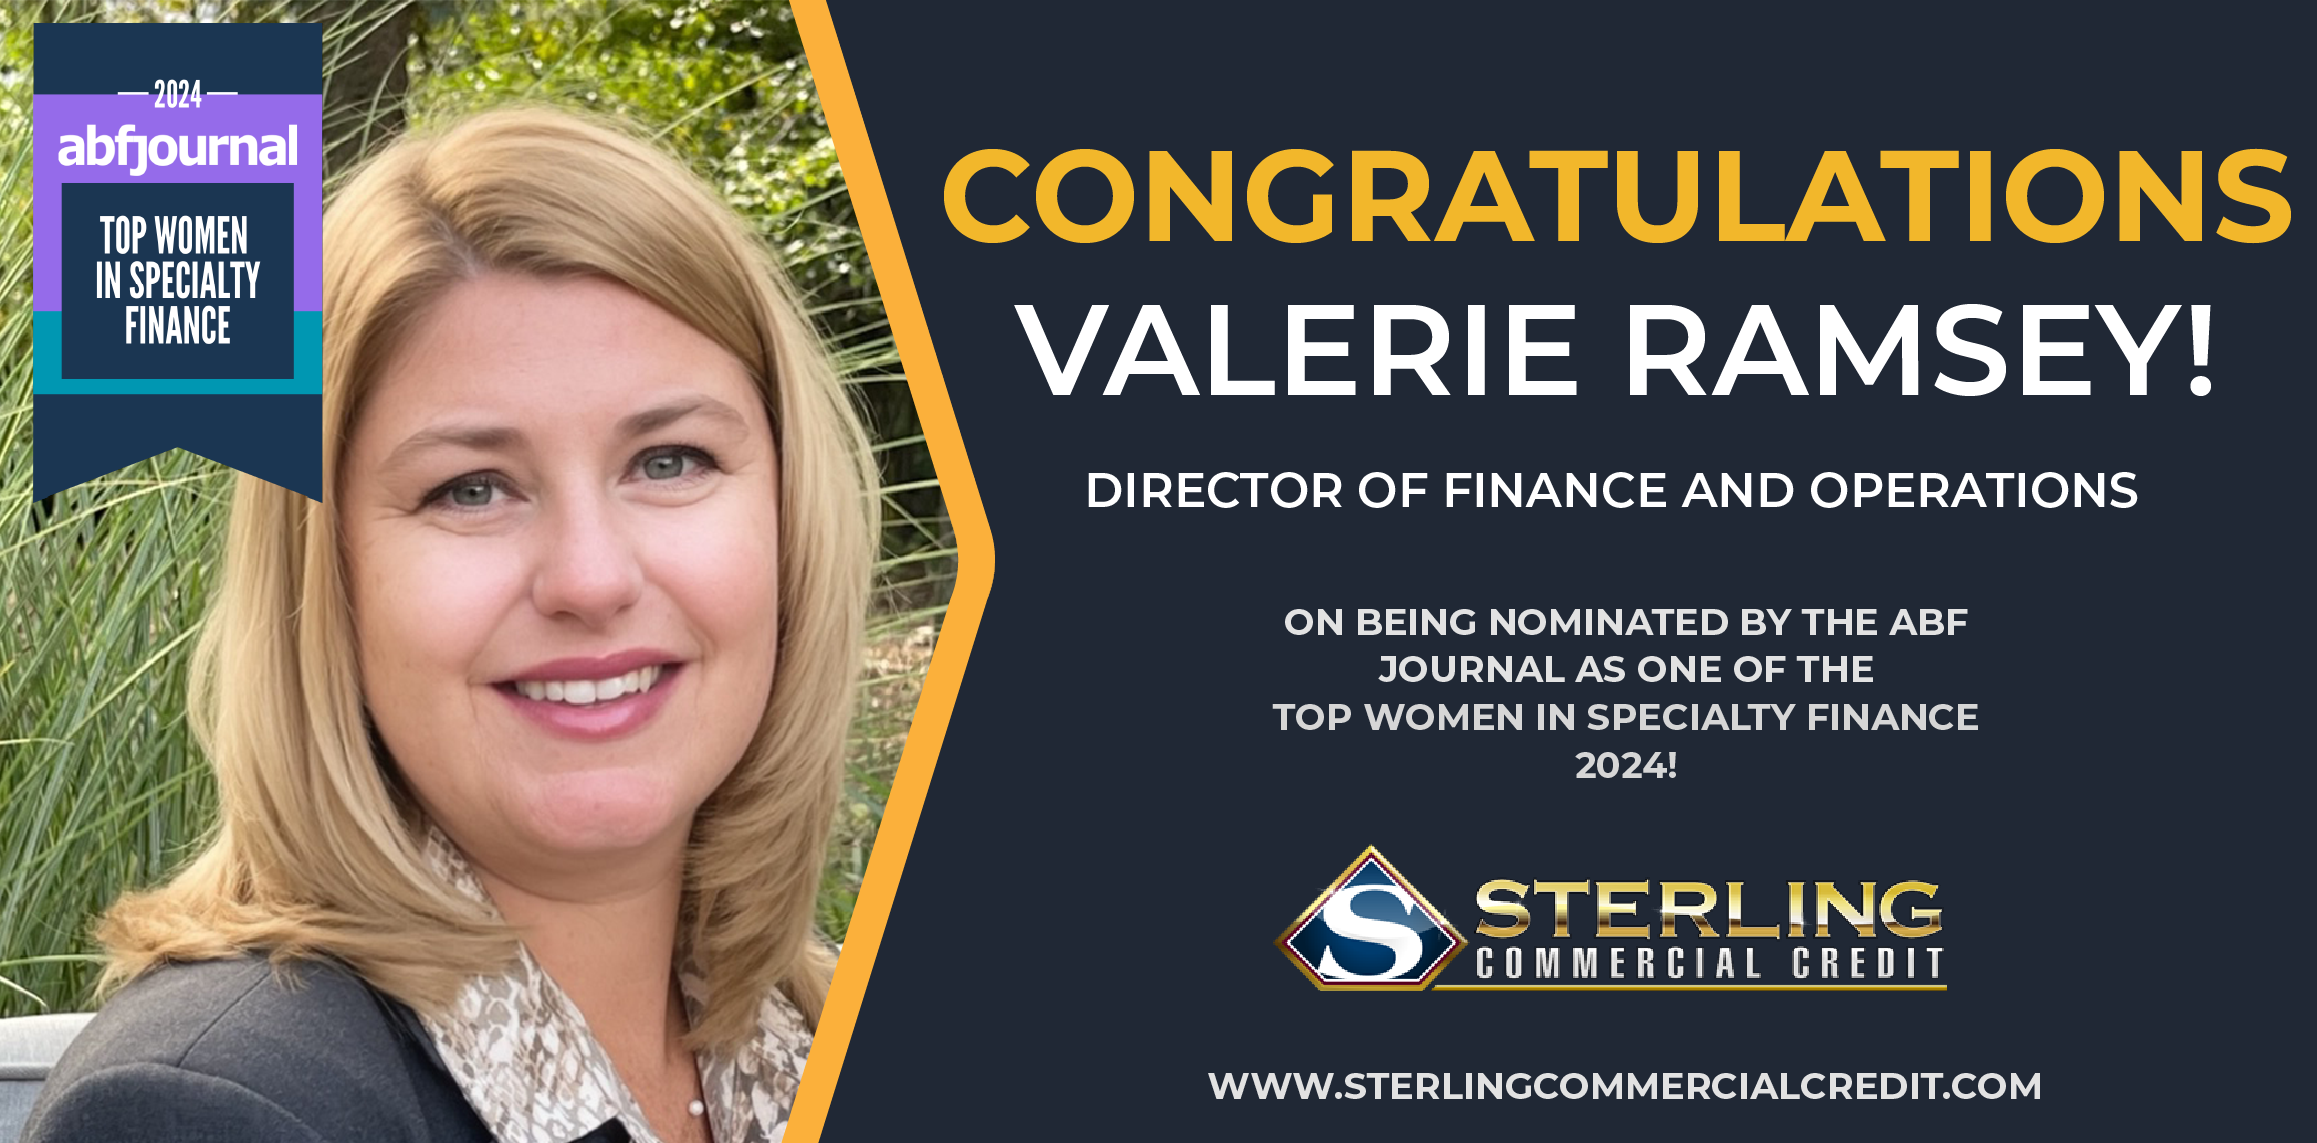 Sterling Commercial Credits' Own Valerie Ramsey Recognized as One of the 'Top Women in Specialty Finance' by ABF Journal for 2024